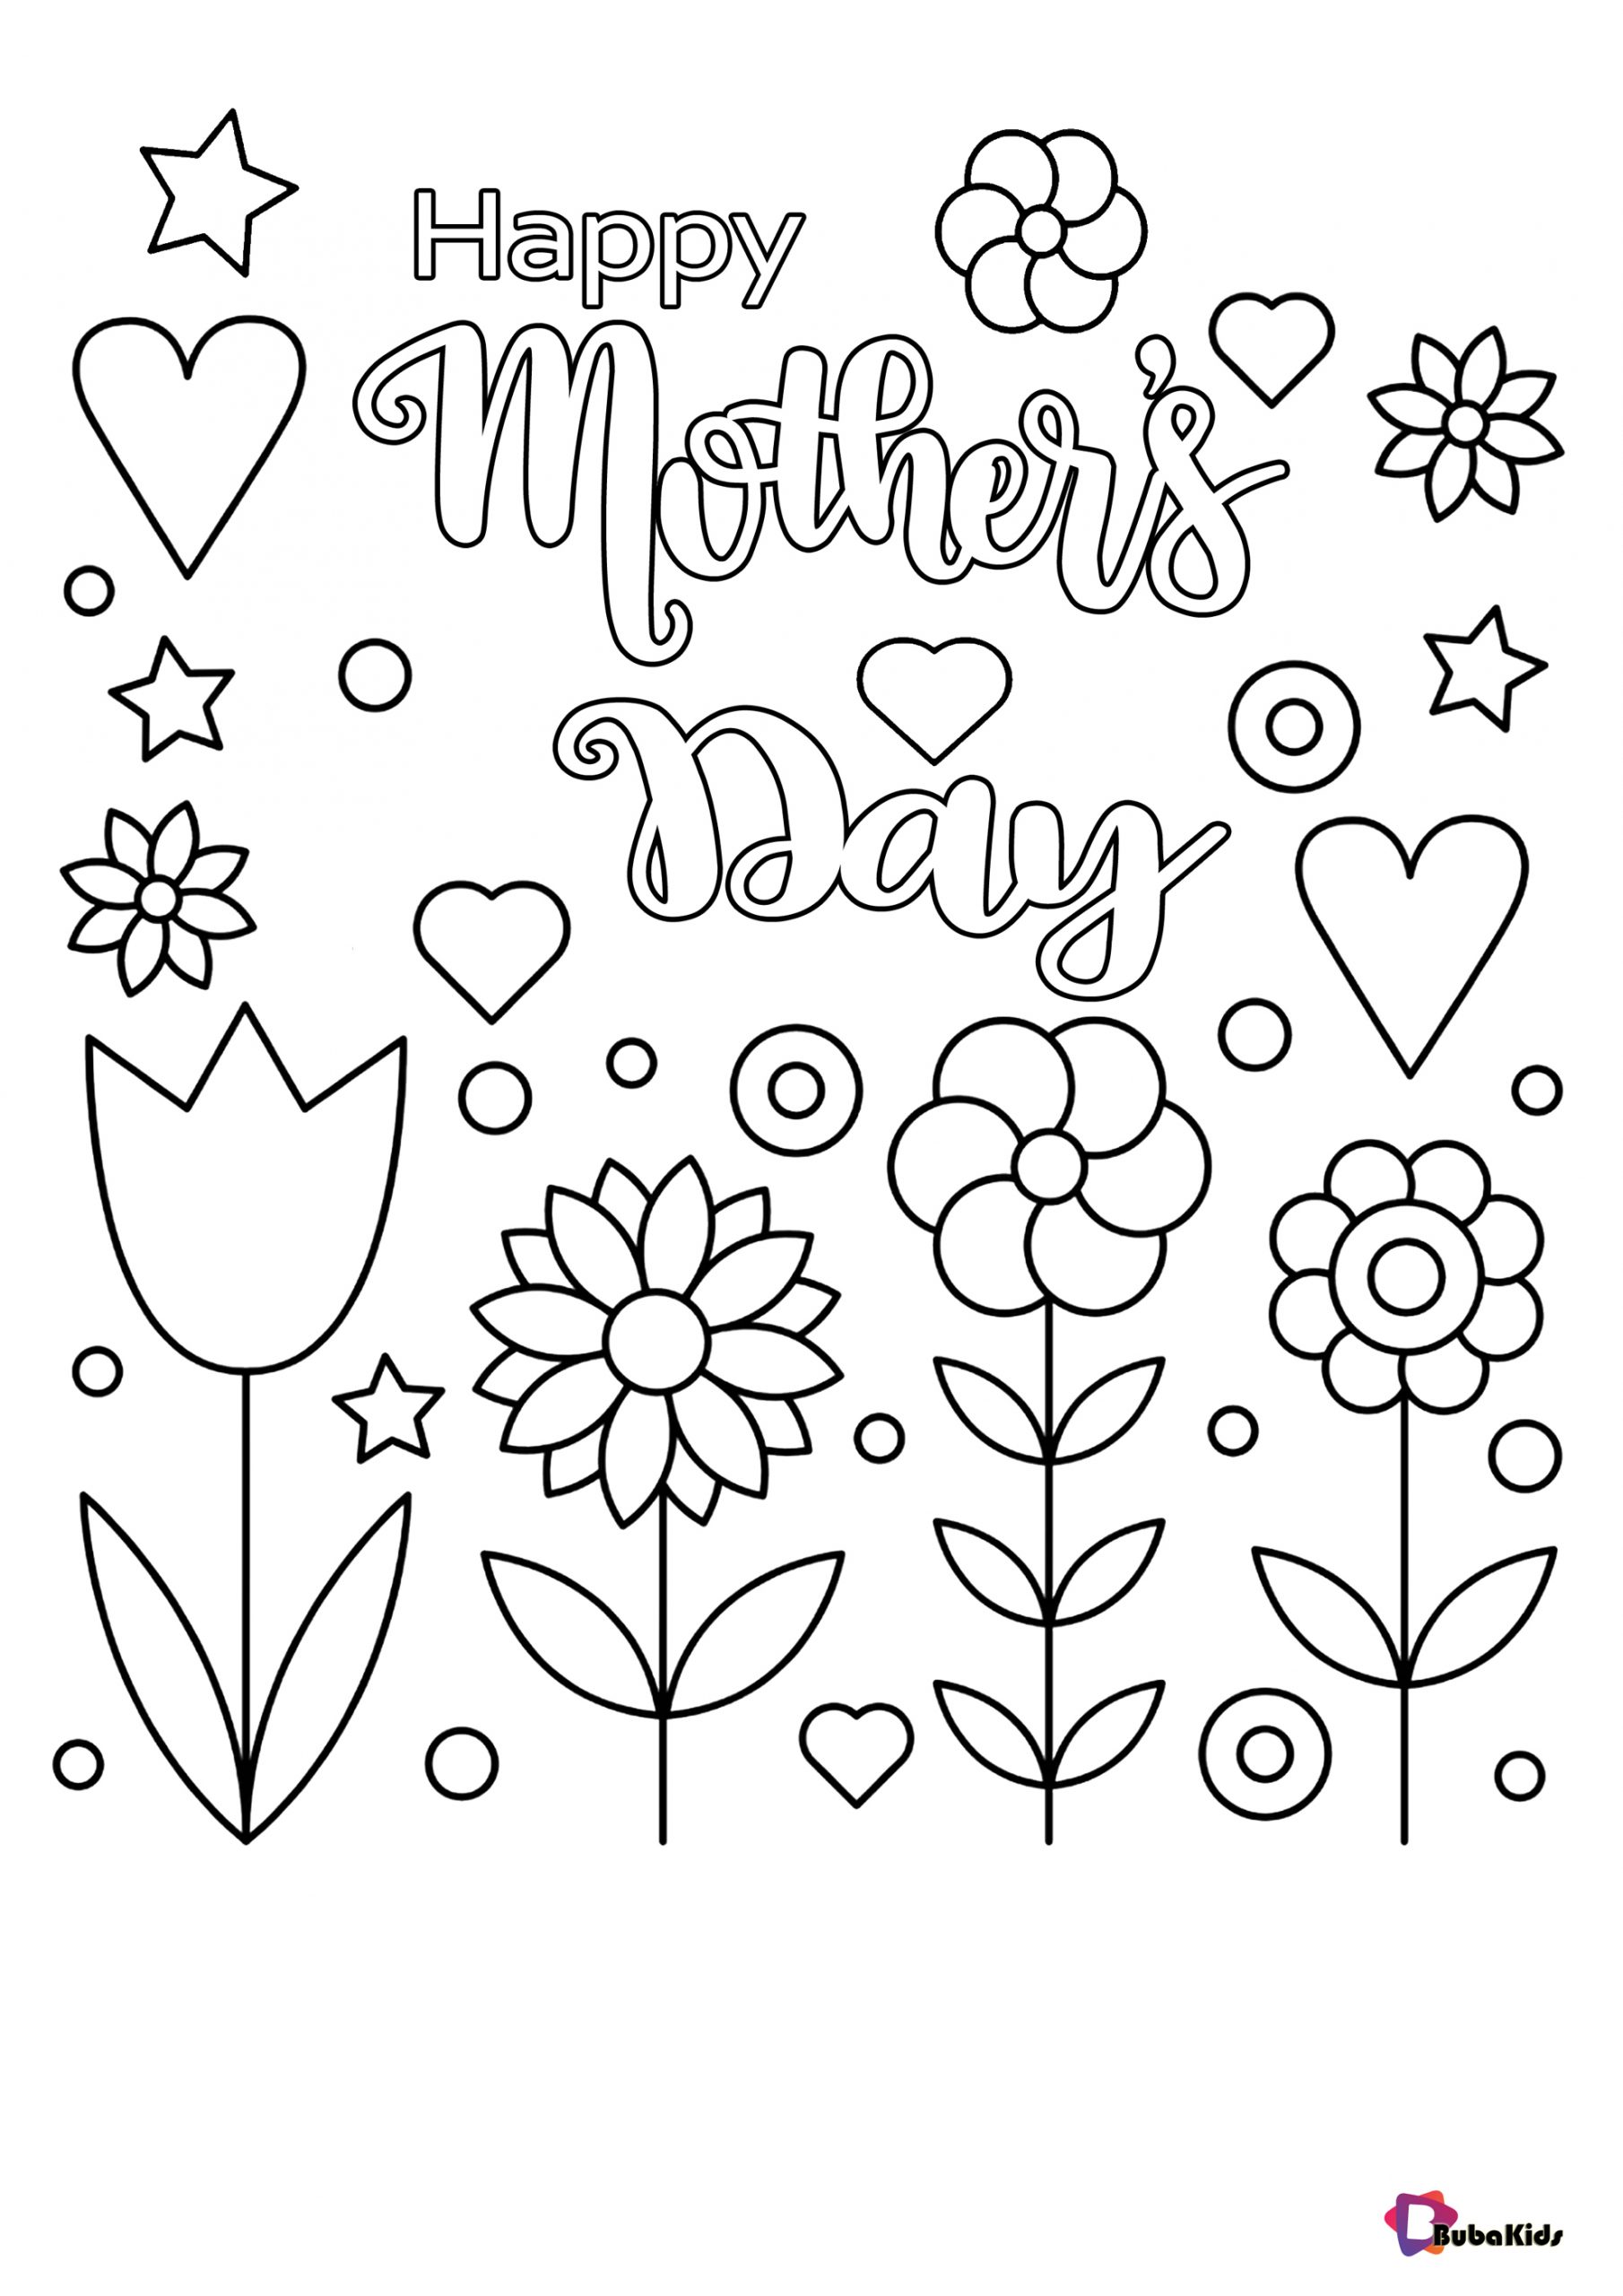 happy-mother-s-day-coloring-pages-happy-tulips-flowers-hearts